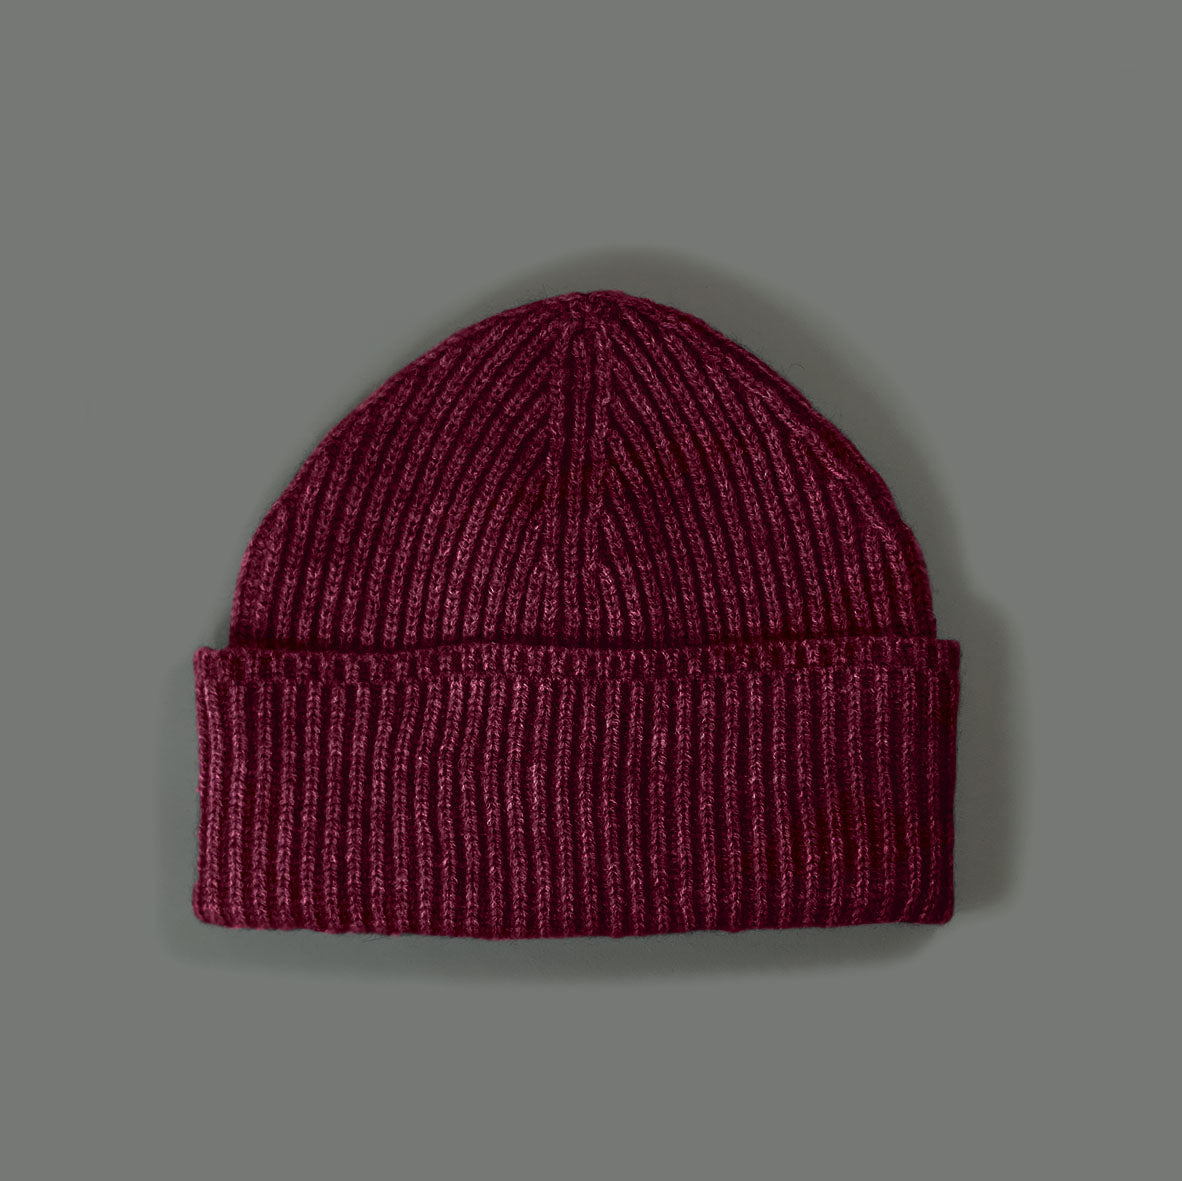 The Classic Beanie in Bordeaux Red. Classic Beanie Bordeaux Red Escape LDN London Plain Blank